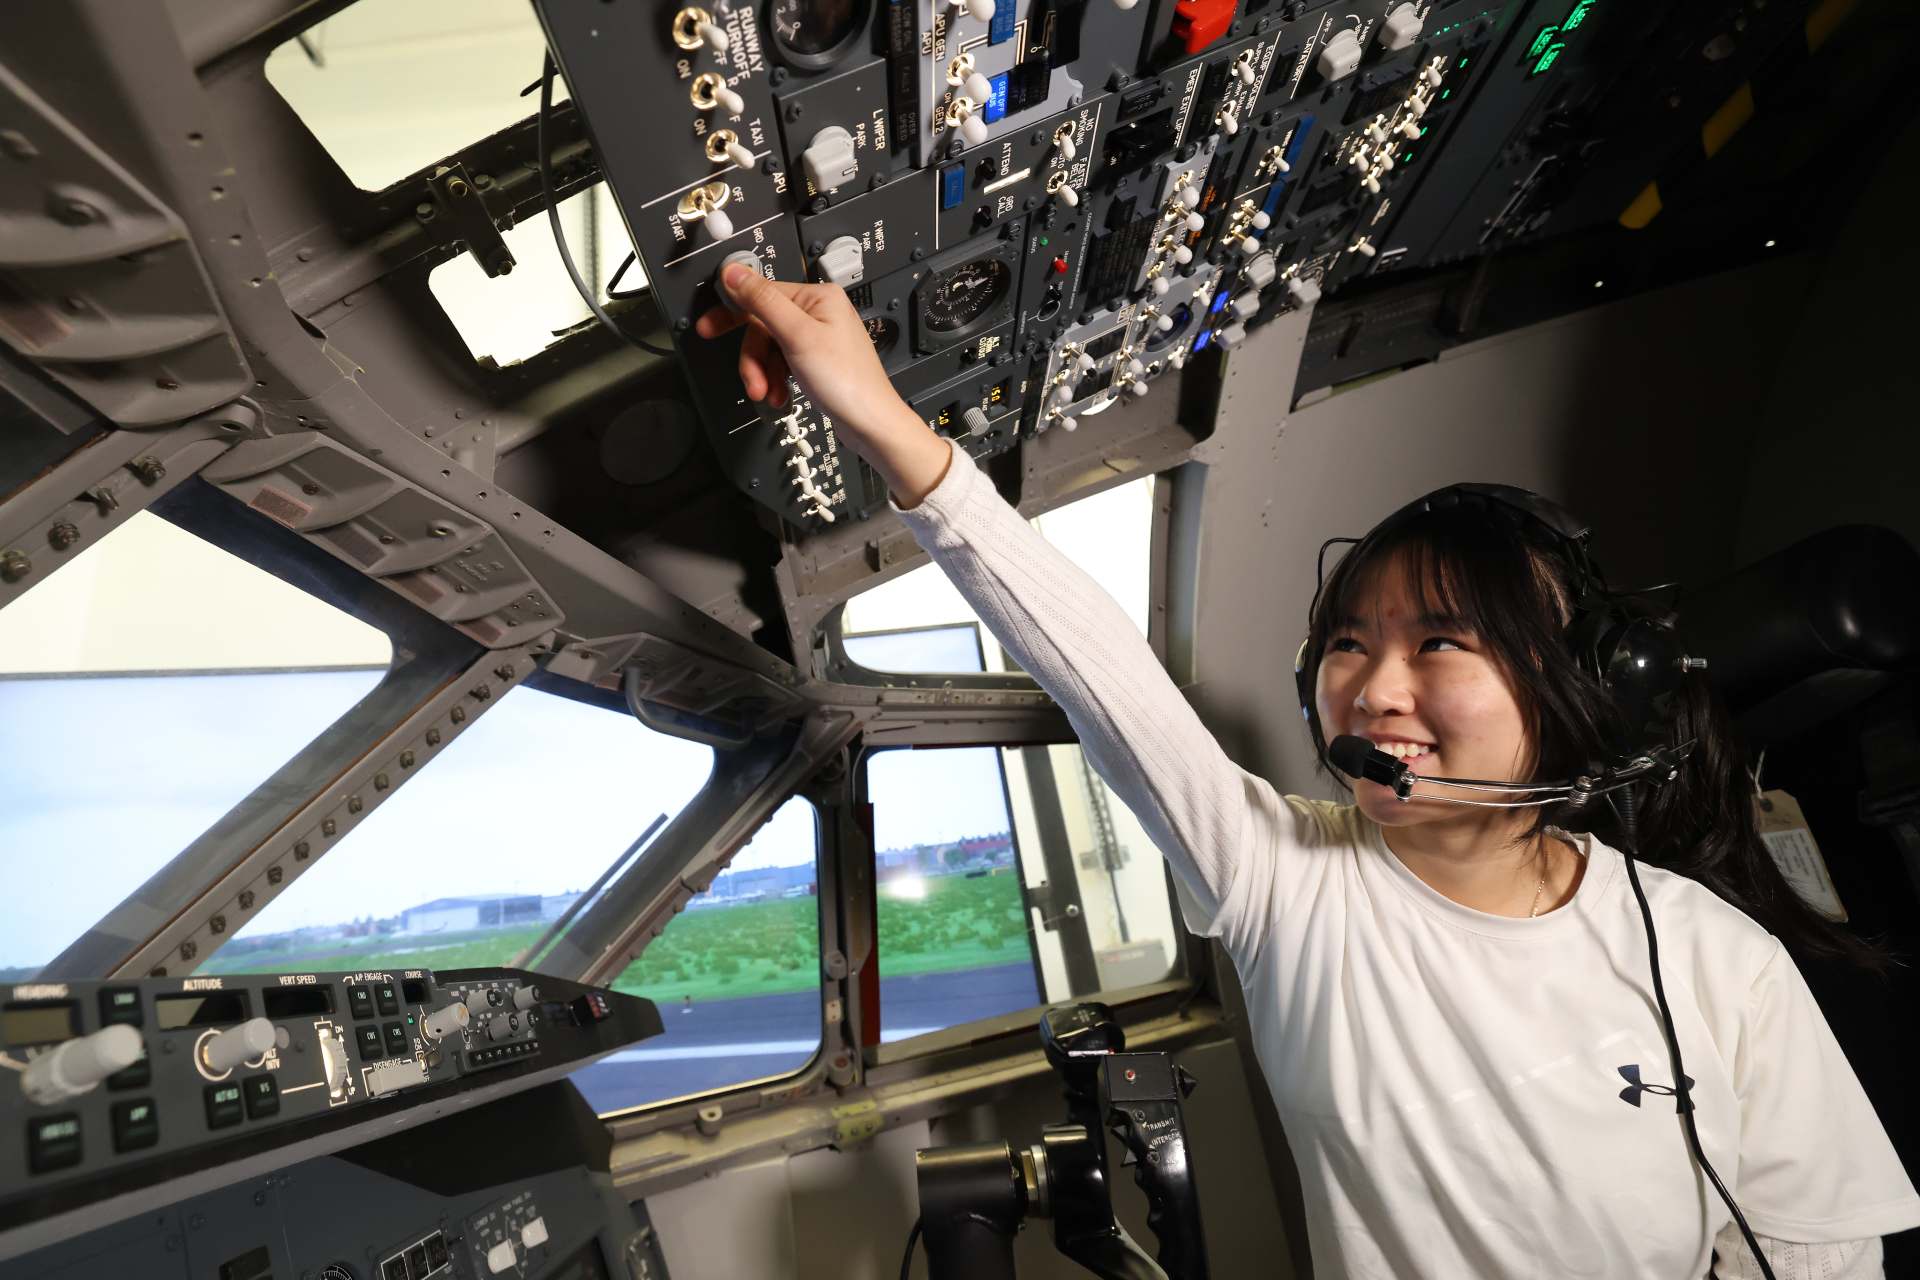 An aerospace engineering student working in an aircraft.